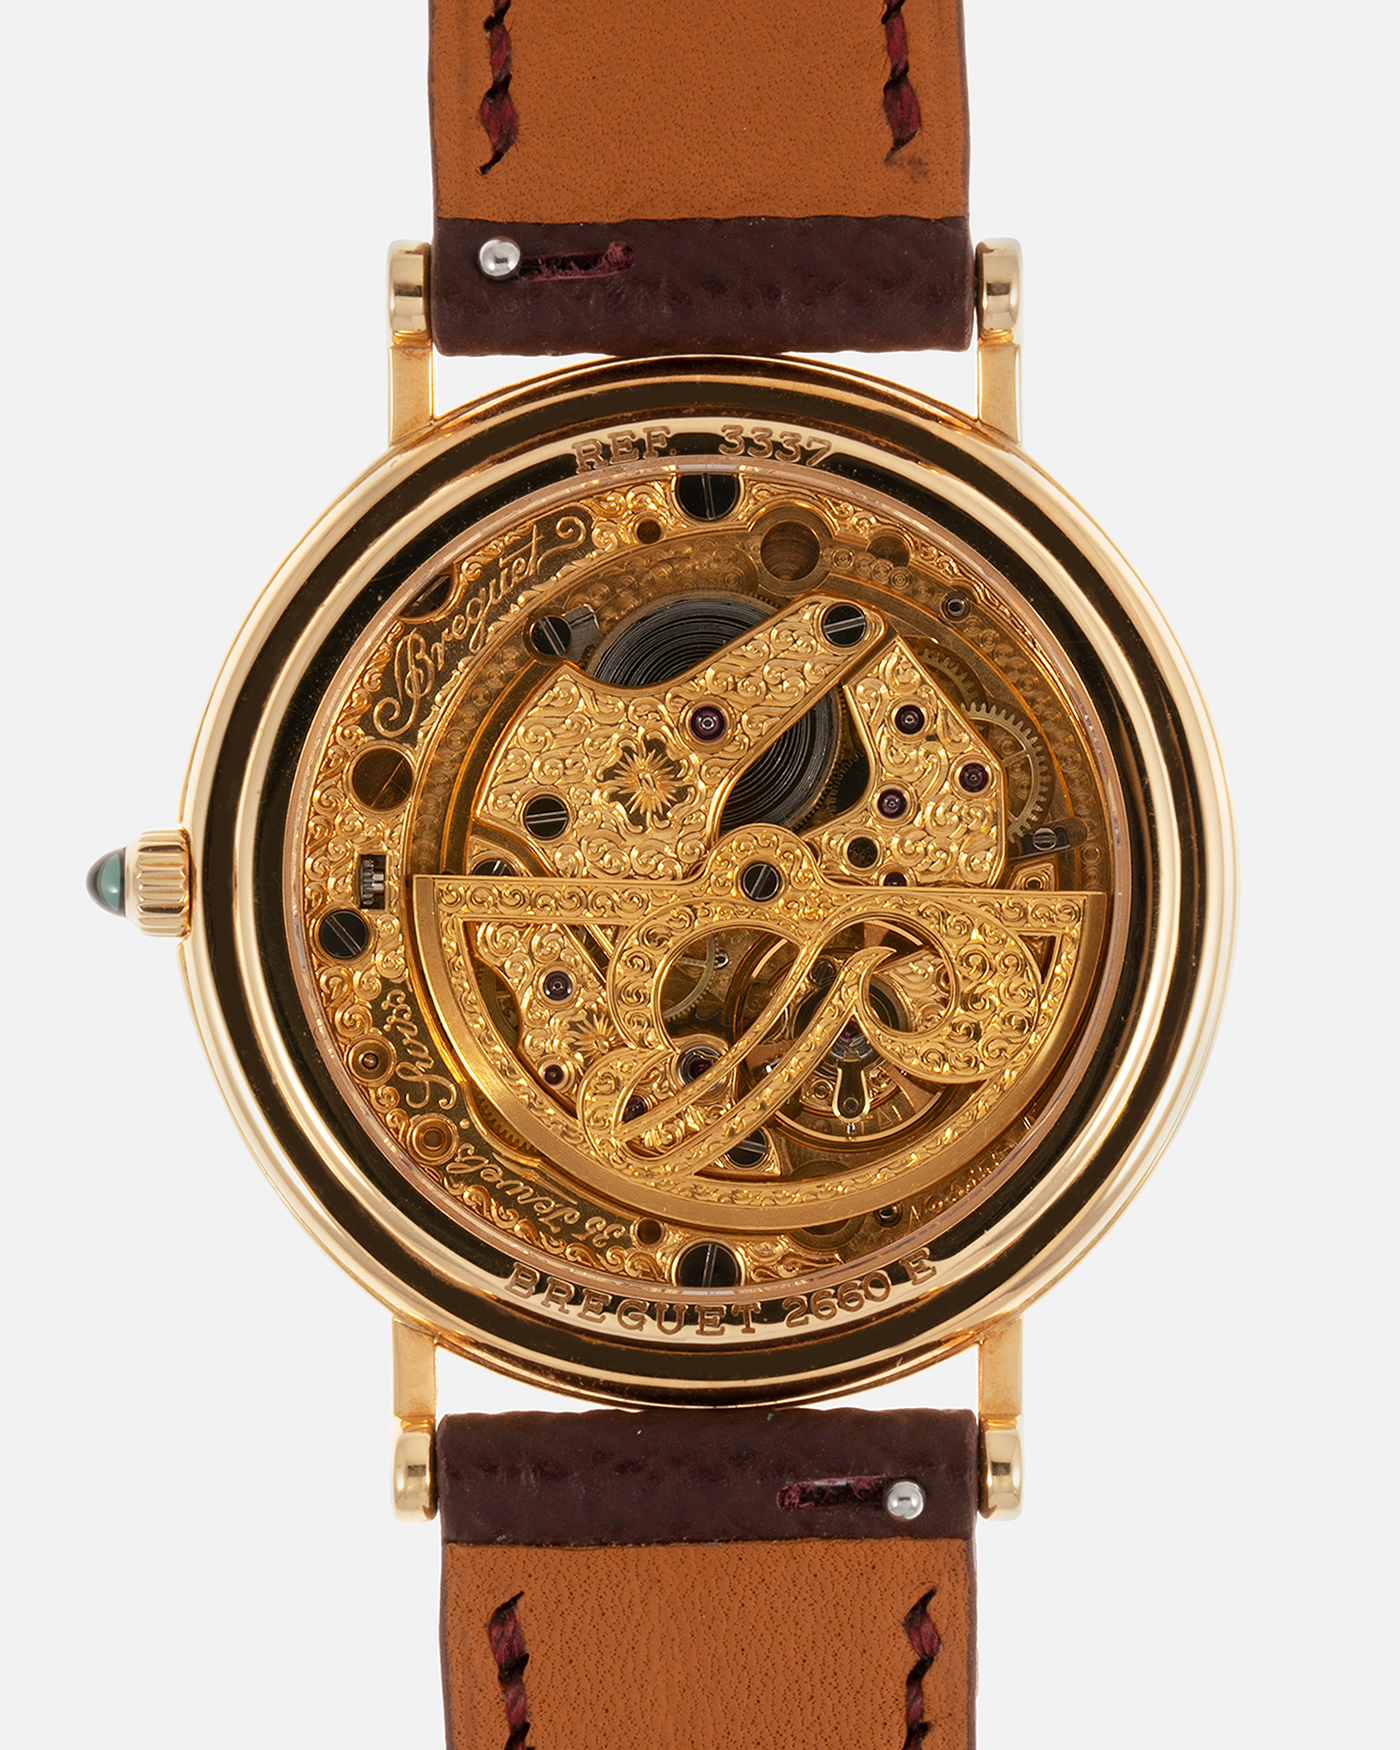 Brand: Breguet Year: 1990’s Model: Classique Day-Date Moon Phase Reference: 3337 Material: 18-carat Yellow Gold Movement: Breguet Cal. 502, Self-Winding Case Diameter: 36mm Lug Width: 18mm Strap: Generic Mahogany Brown Textured Calf Leather with Signed 18-carat Yellow Gold Tang Buckle